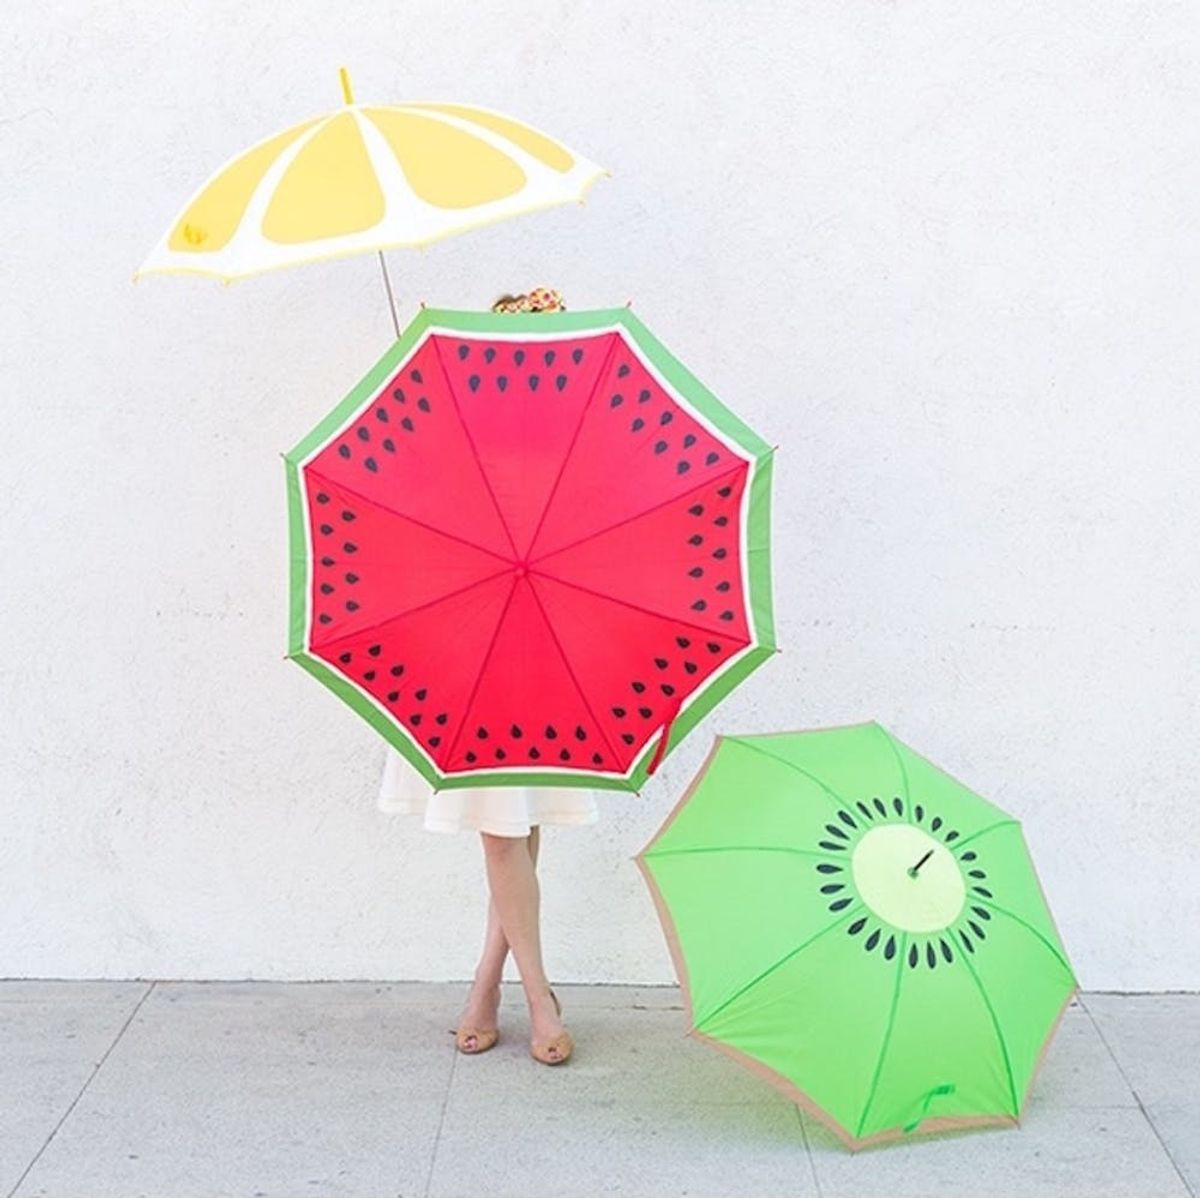 13 Colorful Umbrellas to Brighten Up the Next Rainy Day